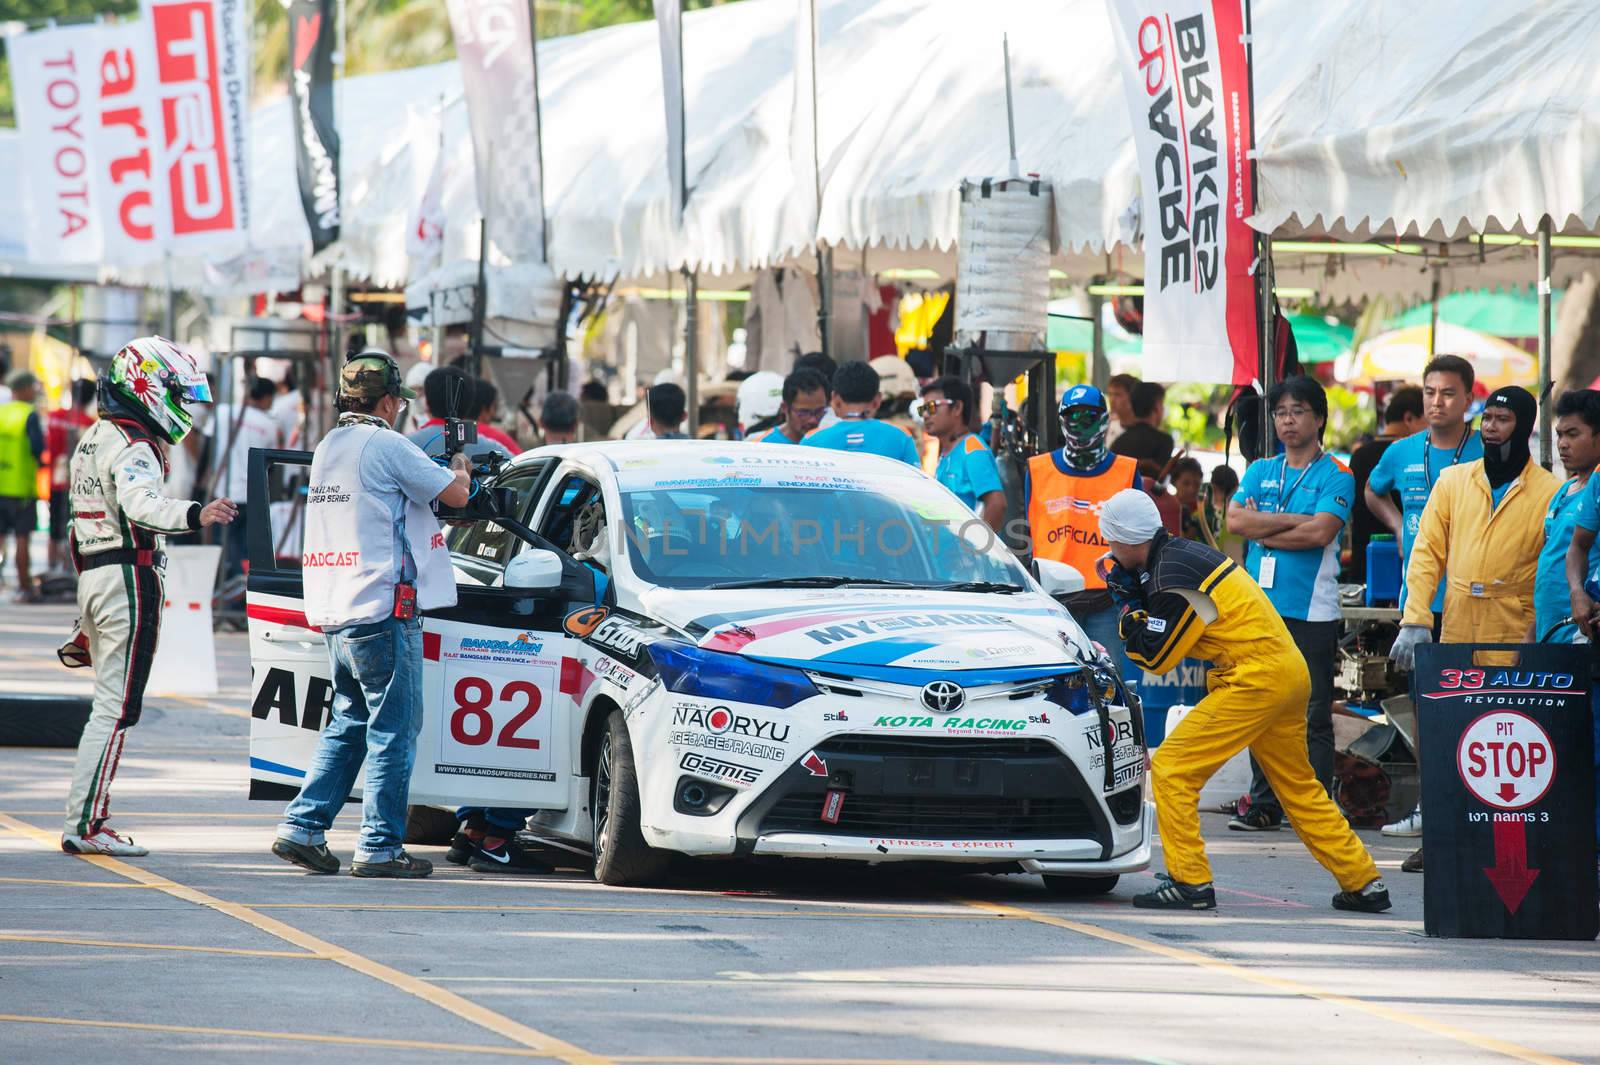 Bang Saen, Thailand - November 27, 2015: Pit stop and driver change for a team during the 6 hour race street race during Bang Saen Speed Festival at Bang Saen, Chonburi, Thailand.